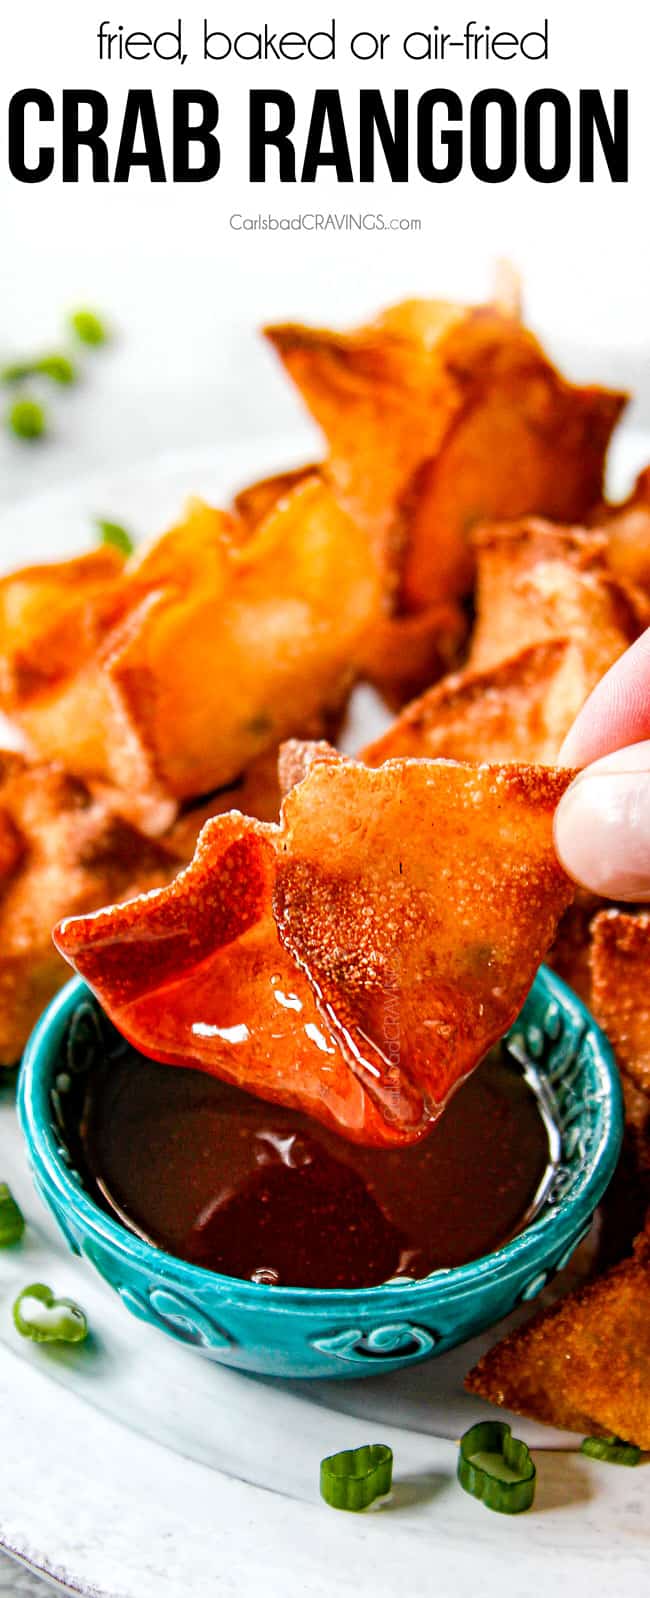 showing what to serve with homemade crab rangoon by dipping into sweet and sour sauce